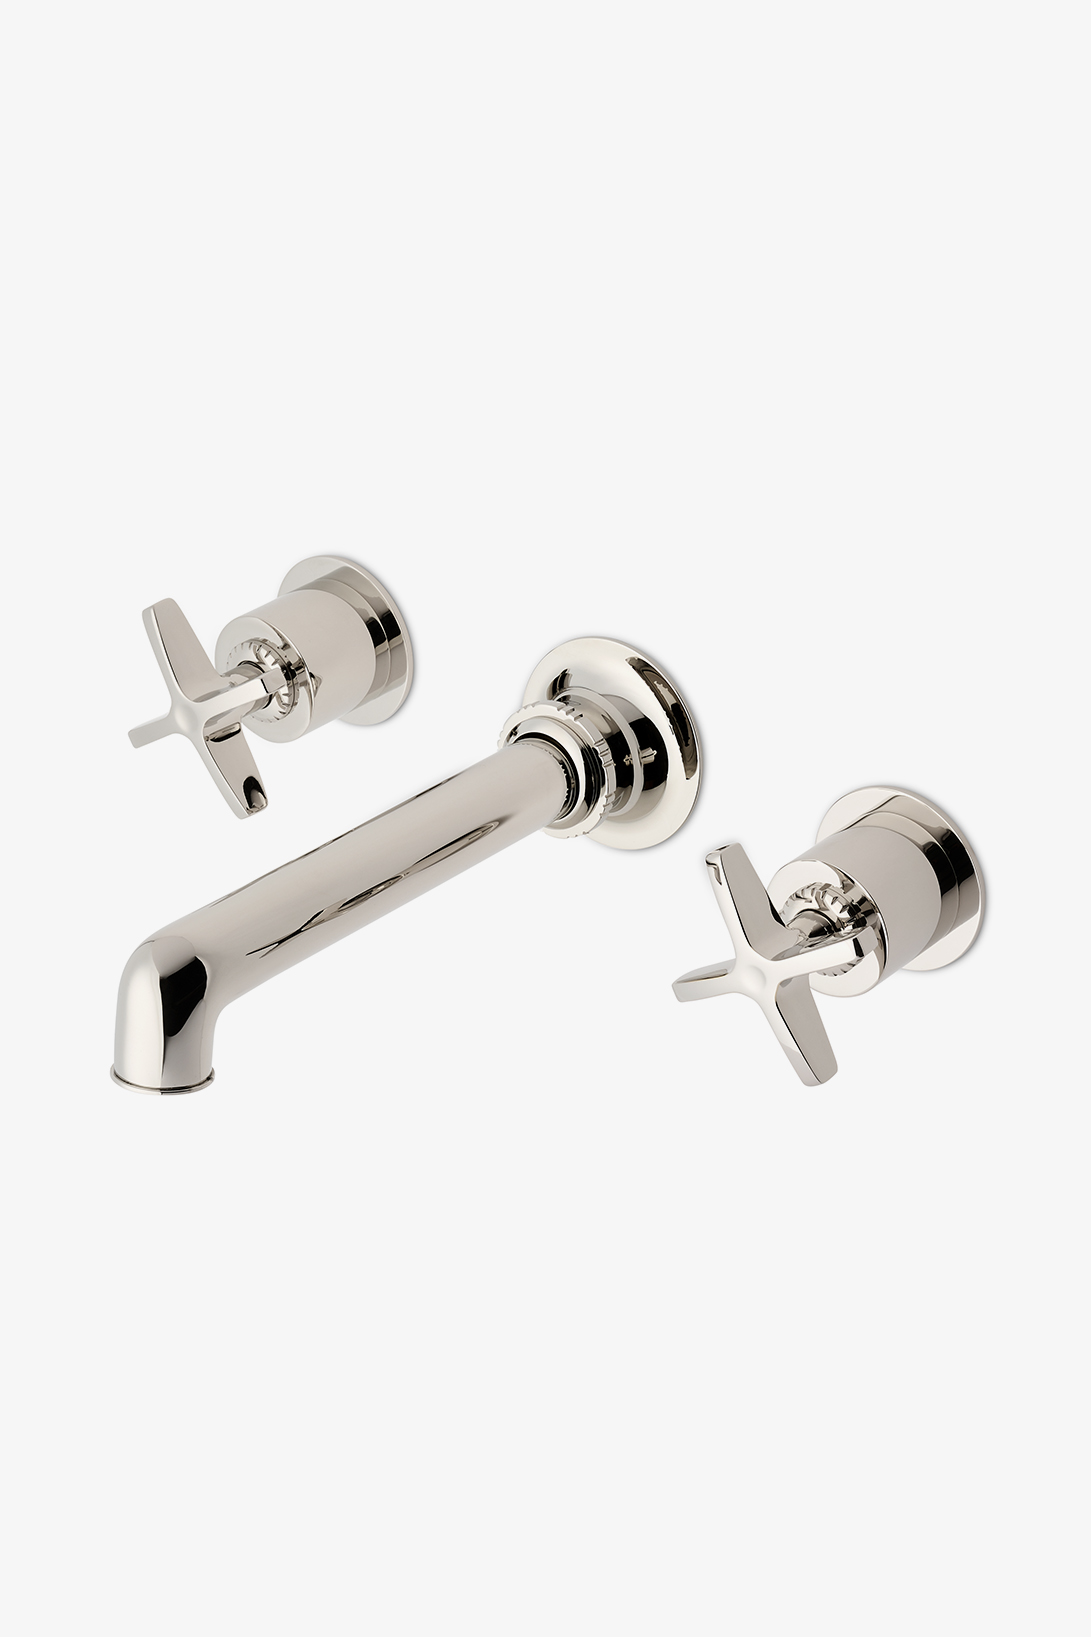 Henry Chronos Wall Mounted Faucet Cross